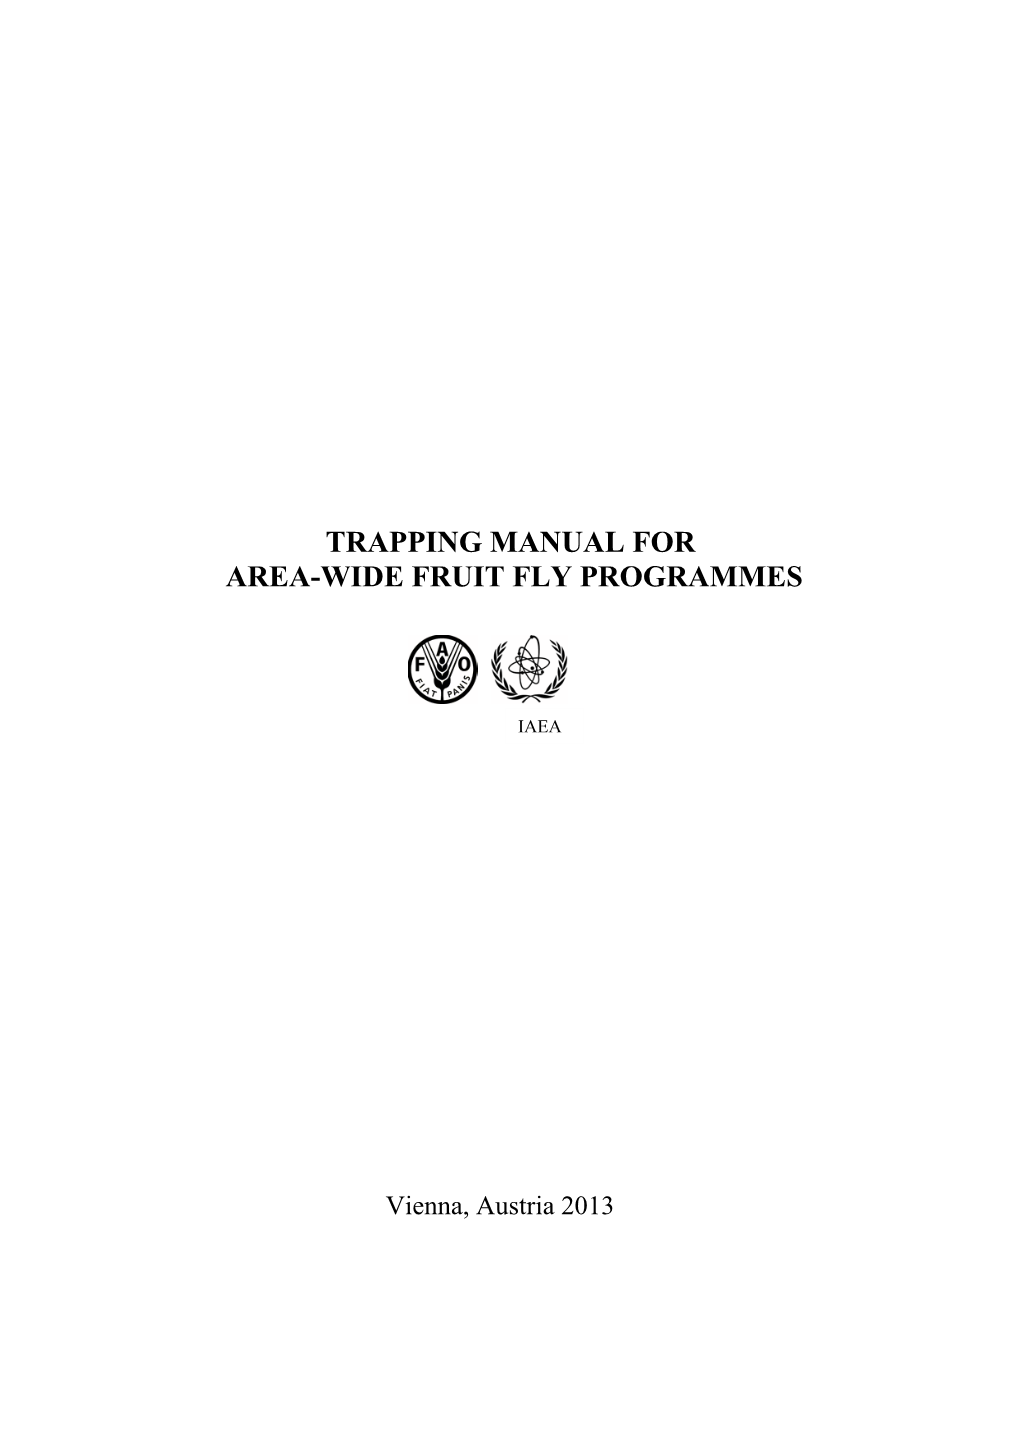 Trapping Manual for Area-Wide Fruit Fly Programmes